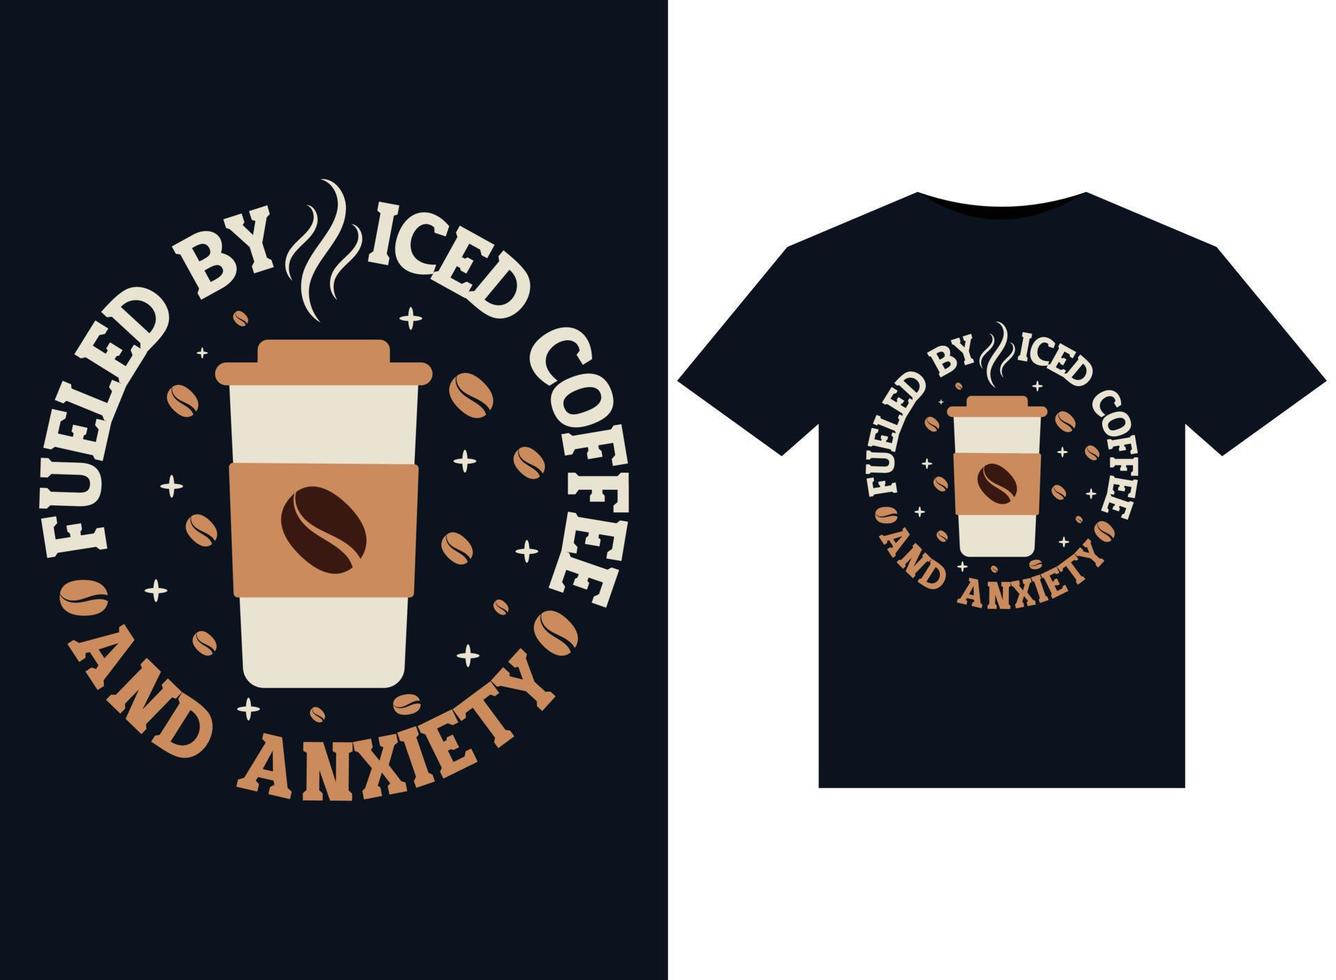 Fueled By Iced Coffee And Anxiety illustrations for print-ready T-Shirts design vector